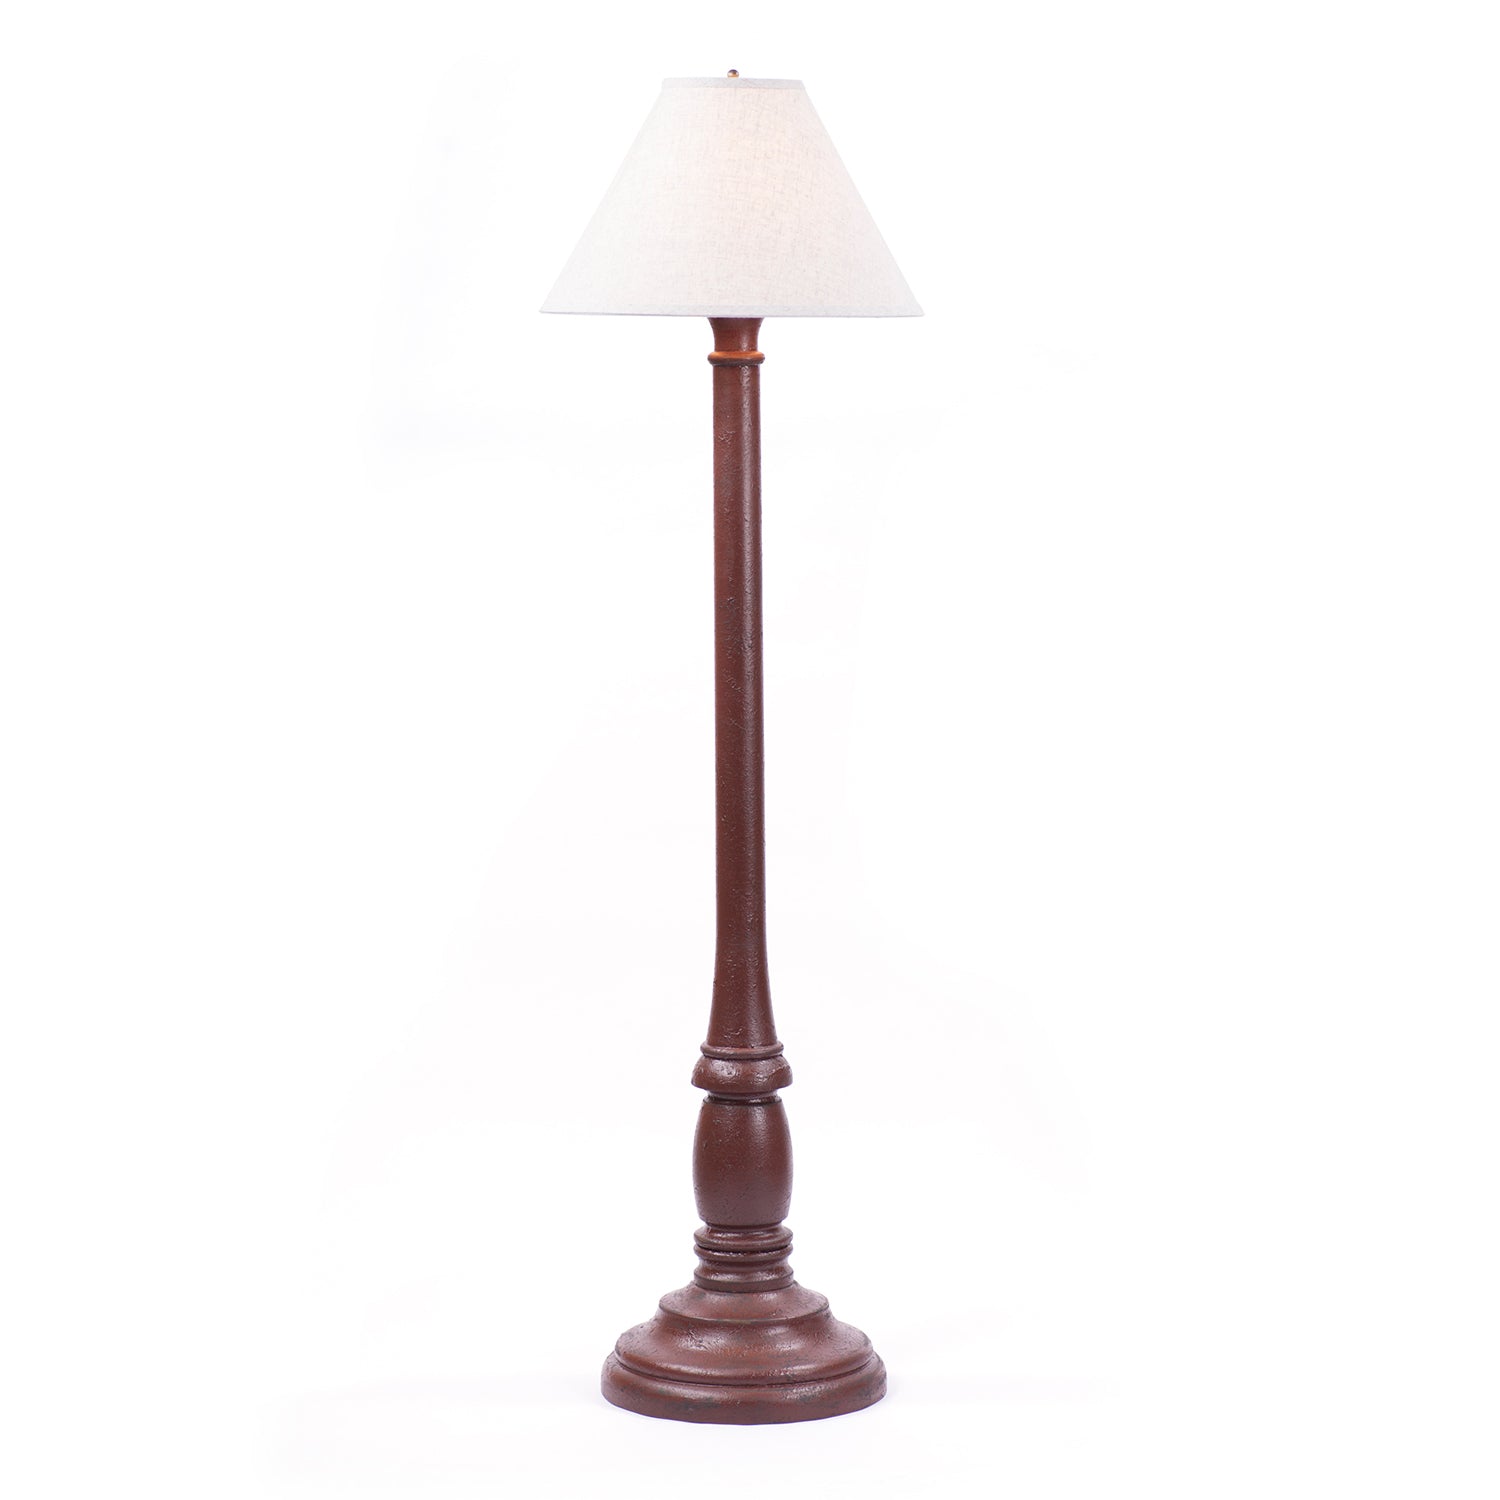 Brinton Floor Lamp in Plantation Red with Linen Ivory Shade